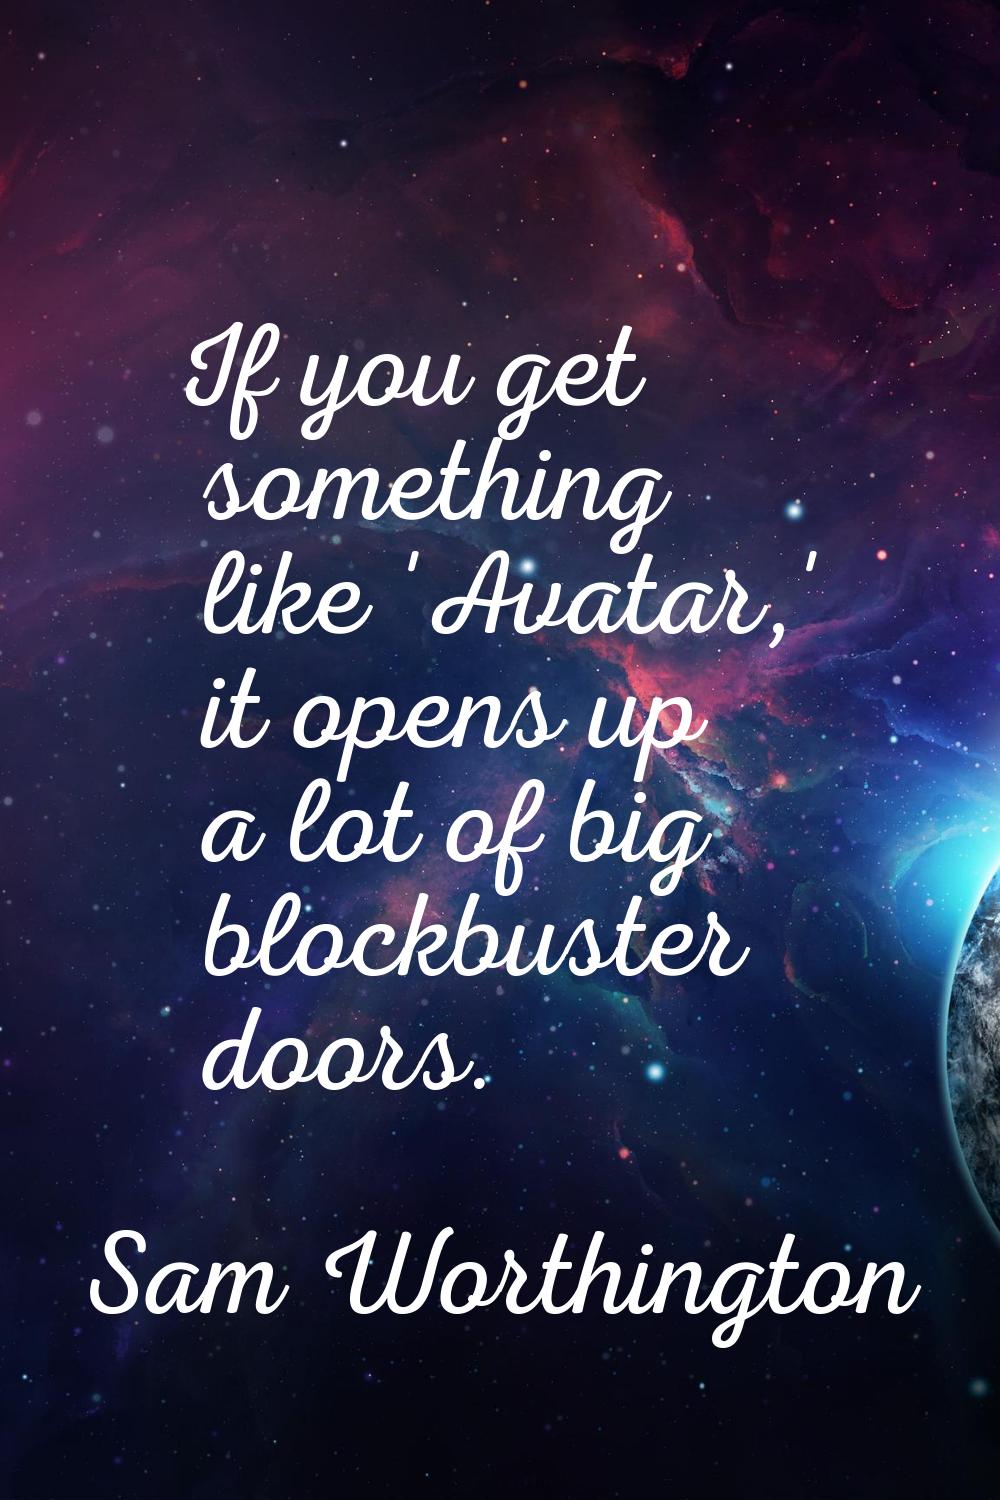 If you get something like 'Avatar,' it opens up a lot of big blockbuster doors.